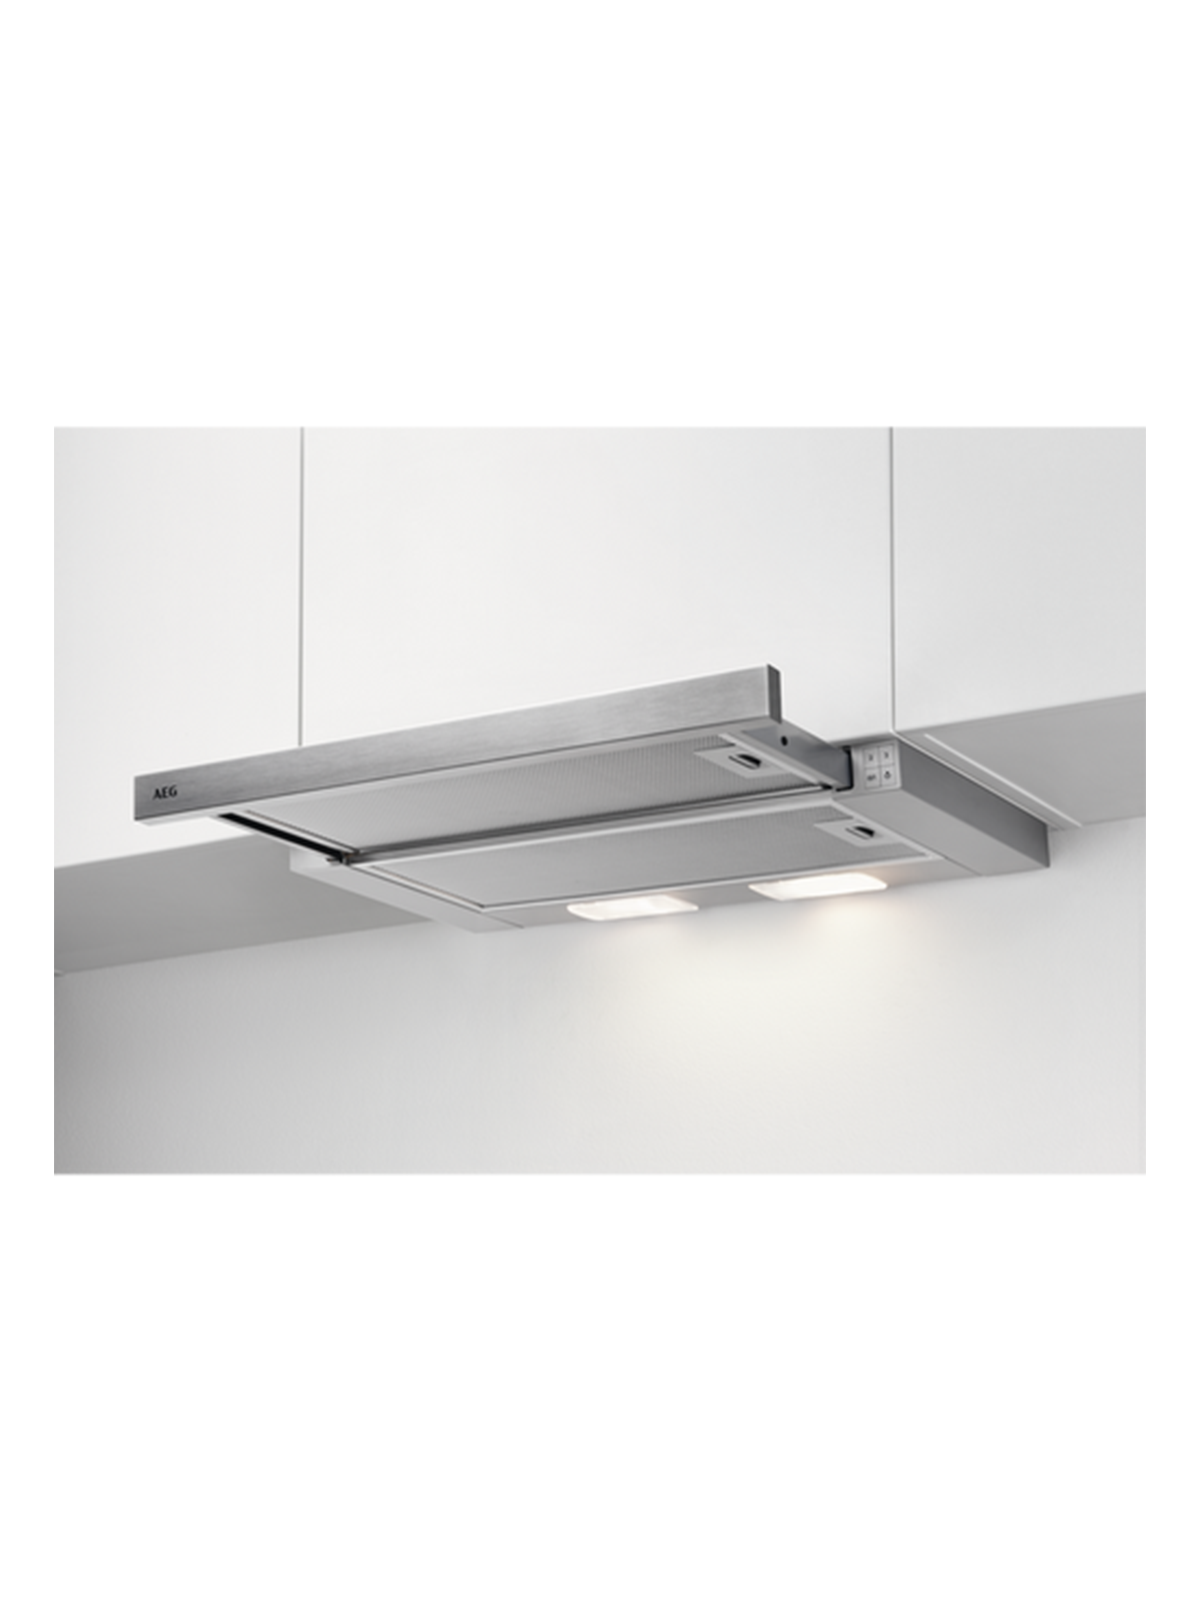 AEG Built-in Cooker Hood 60cm DPB3632S C Rated -  Stainless Steel | ElekDirect